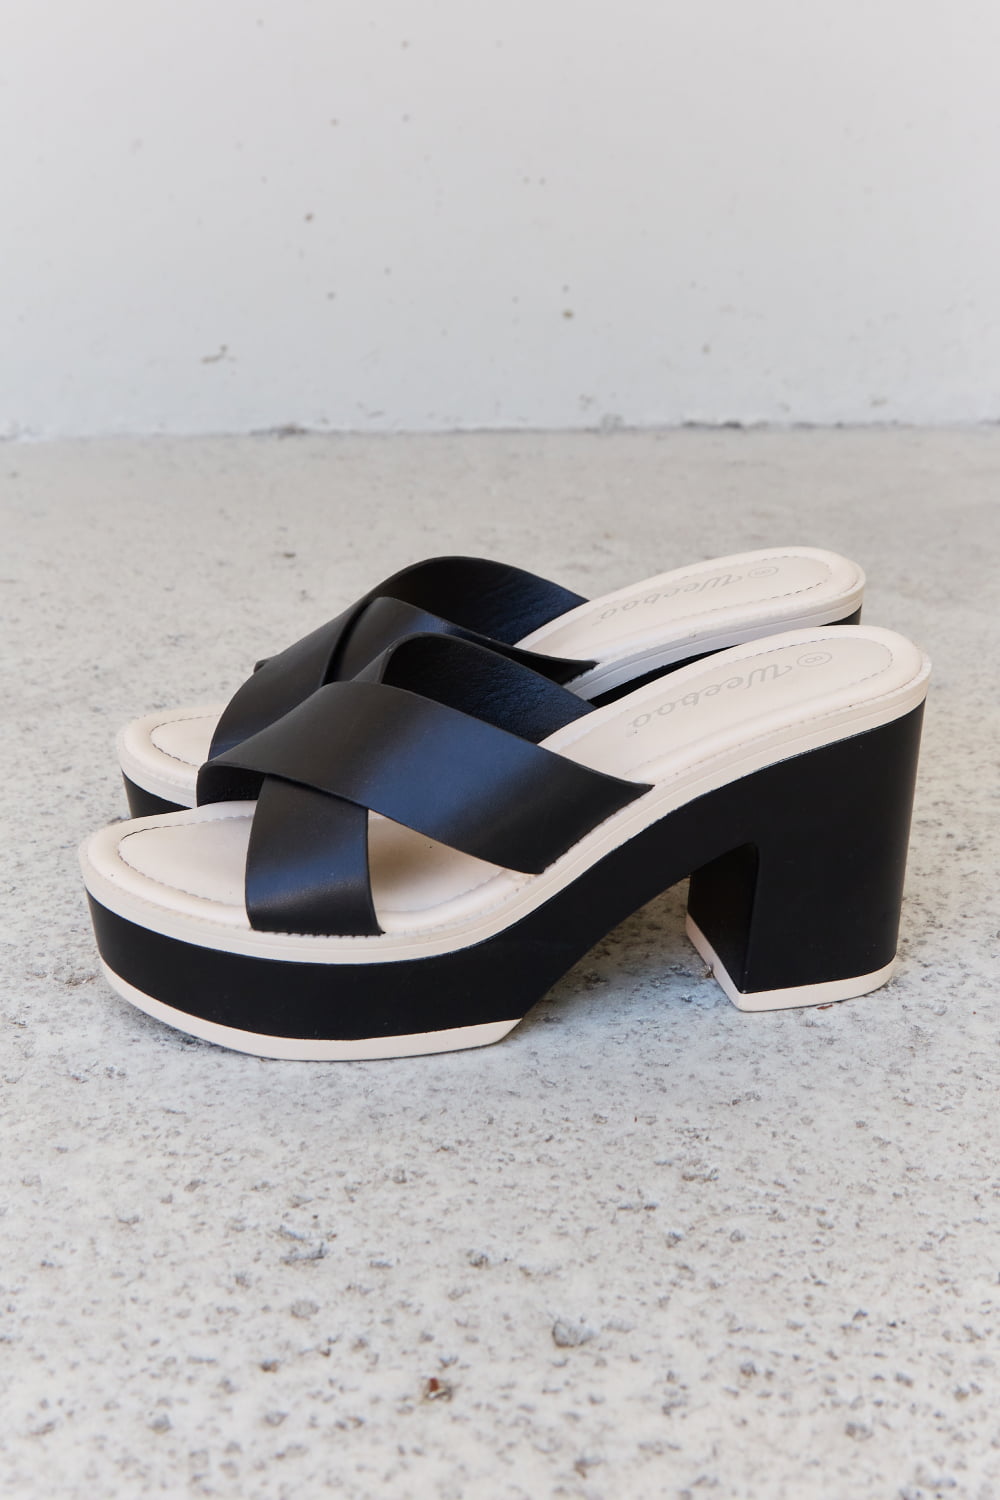 Weeboo Cherish The Moments Contrast Platform Sandals in Black - Guy Christopher 